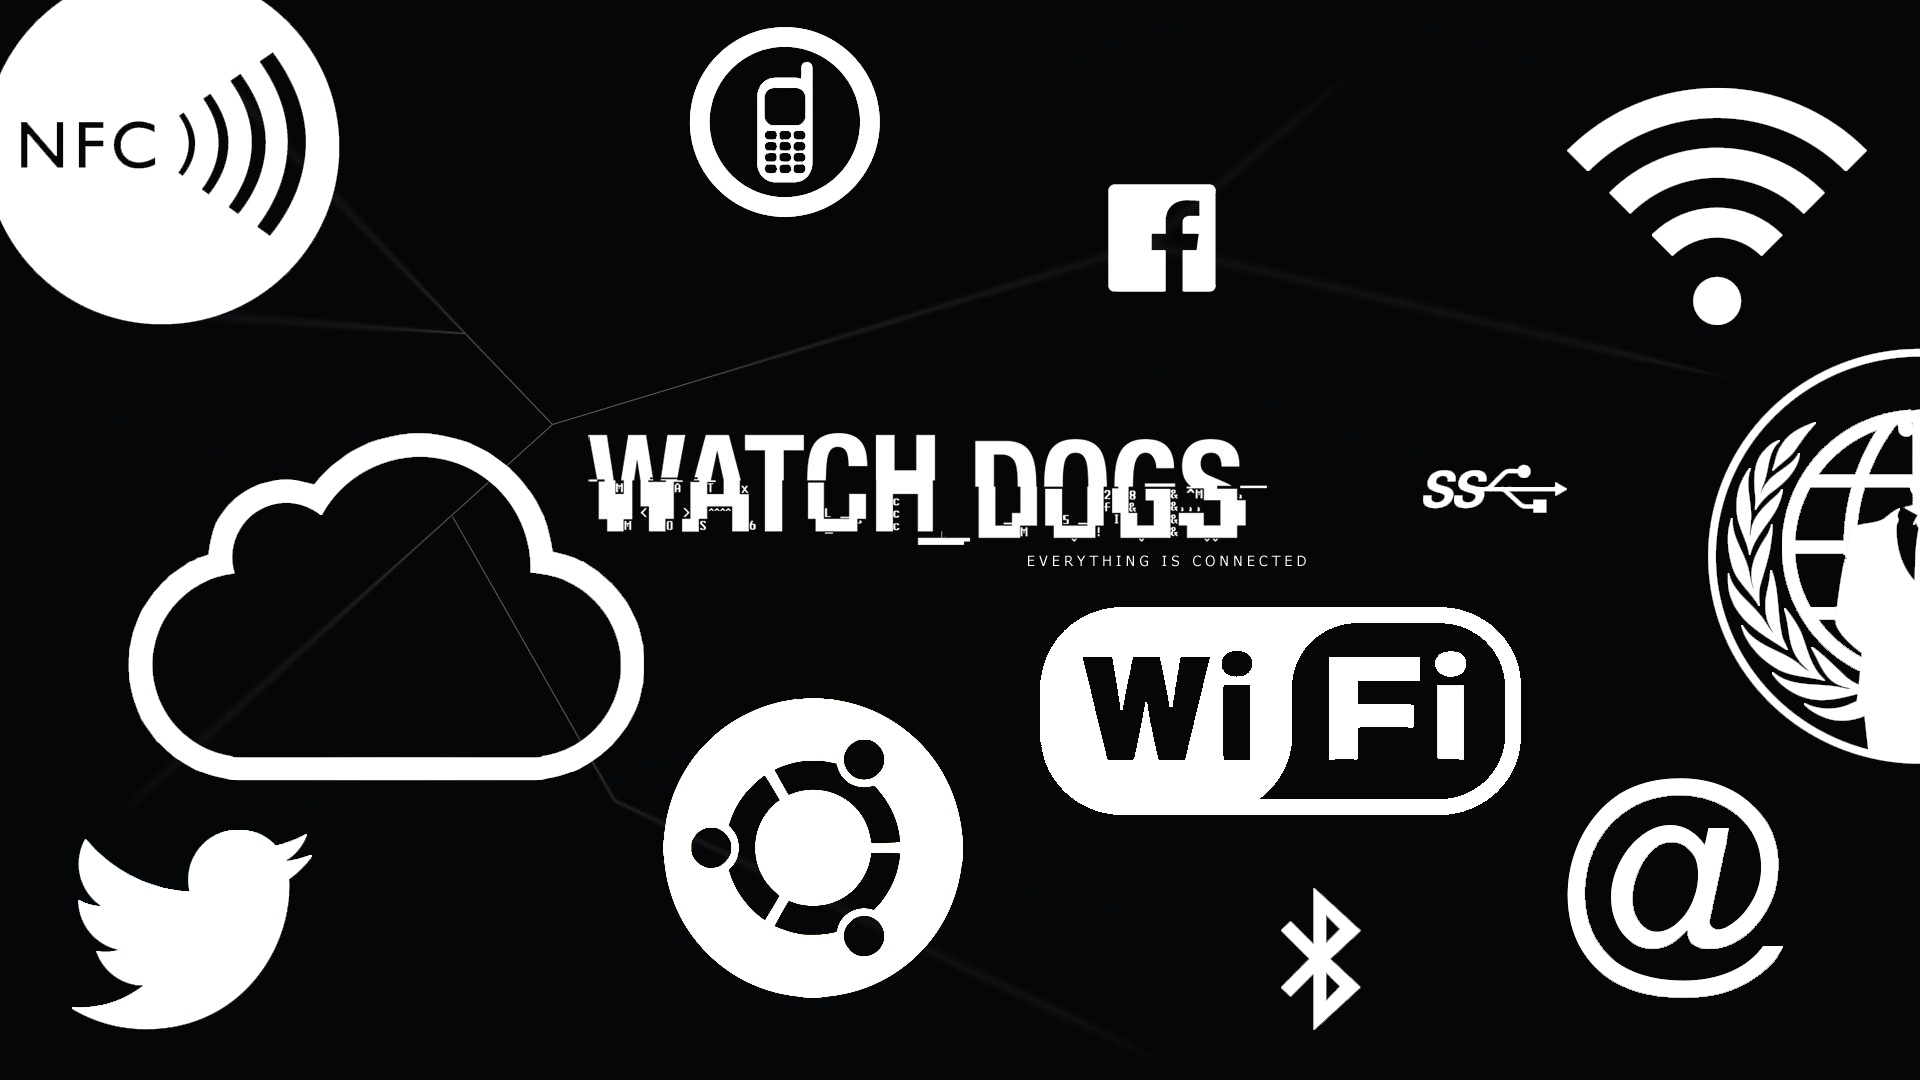 Download Dedsec Watch Dogs wallpapers for mobile phone free Dedsec  Watch Dogs HD pictures